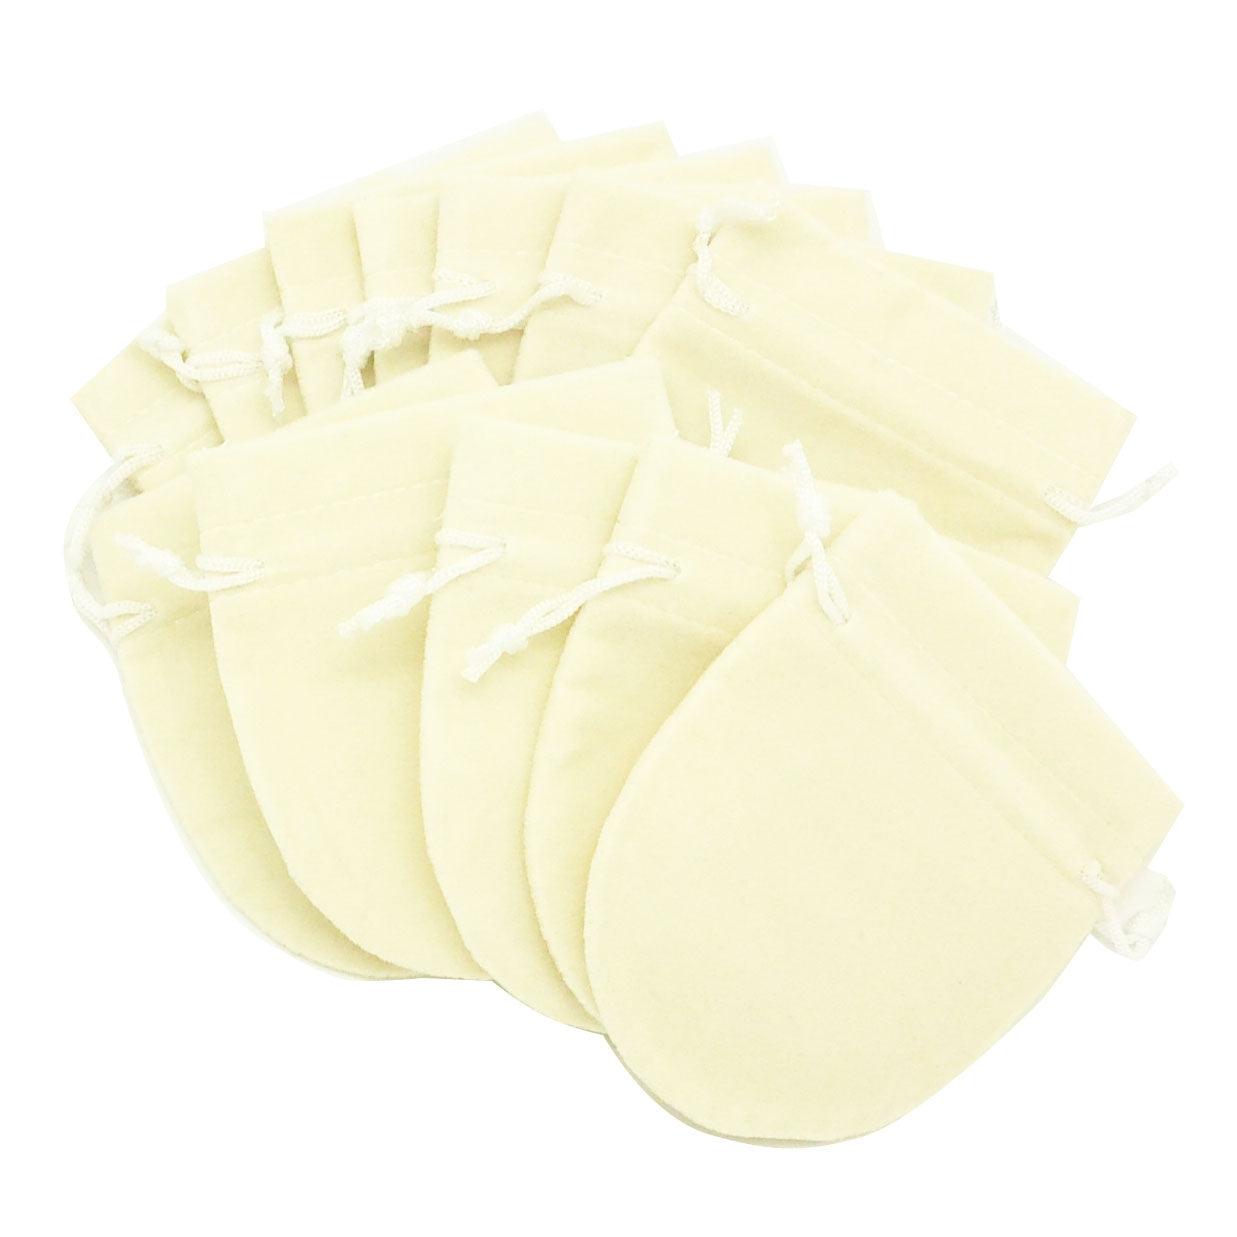 Medium Beige High Quality Velvet Round Pouch Bags Party Favors